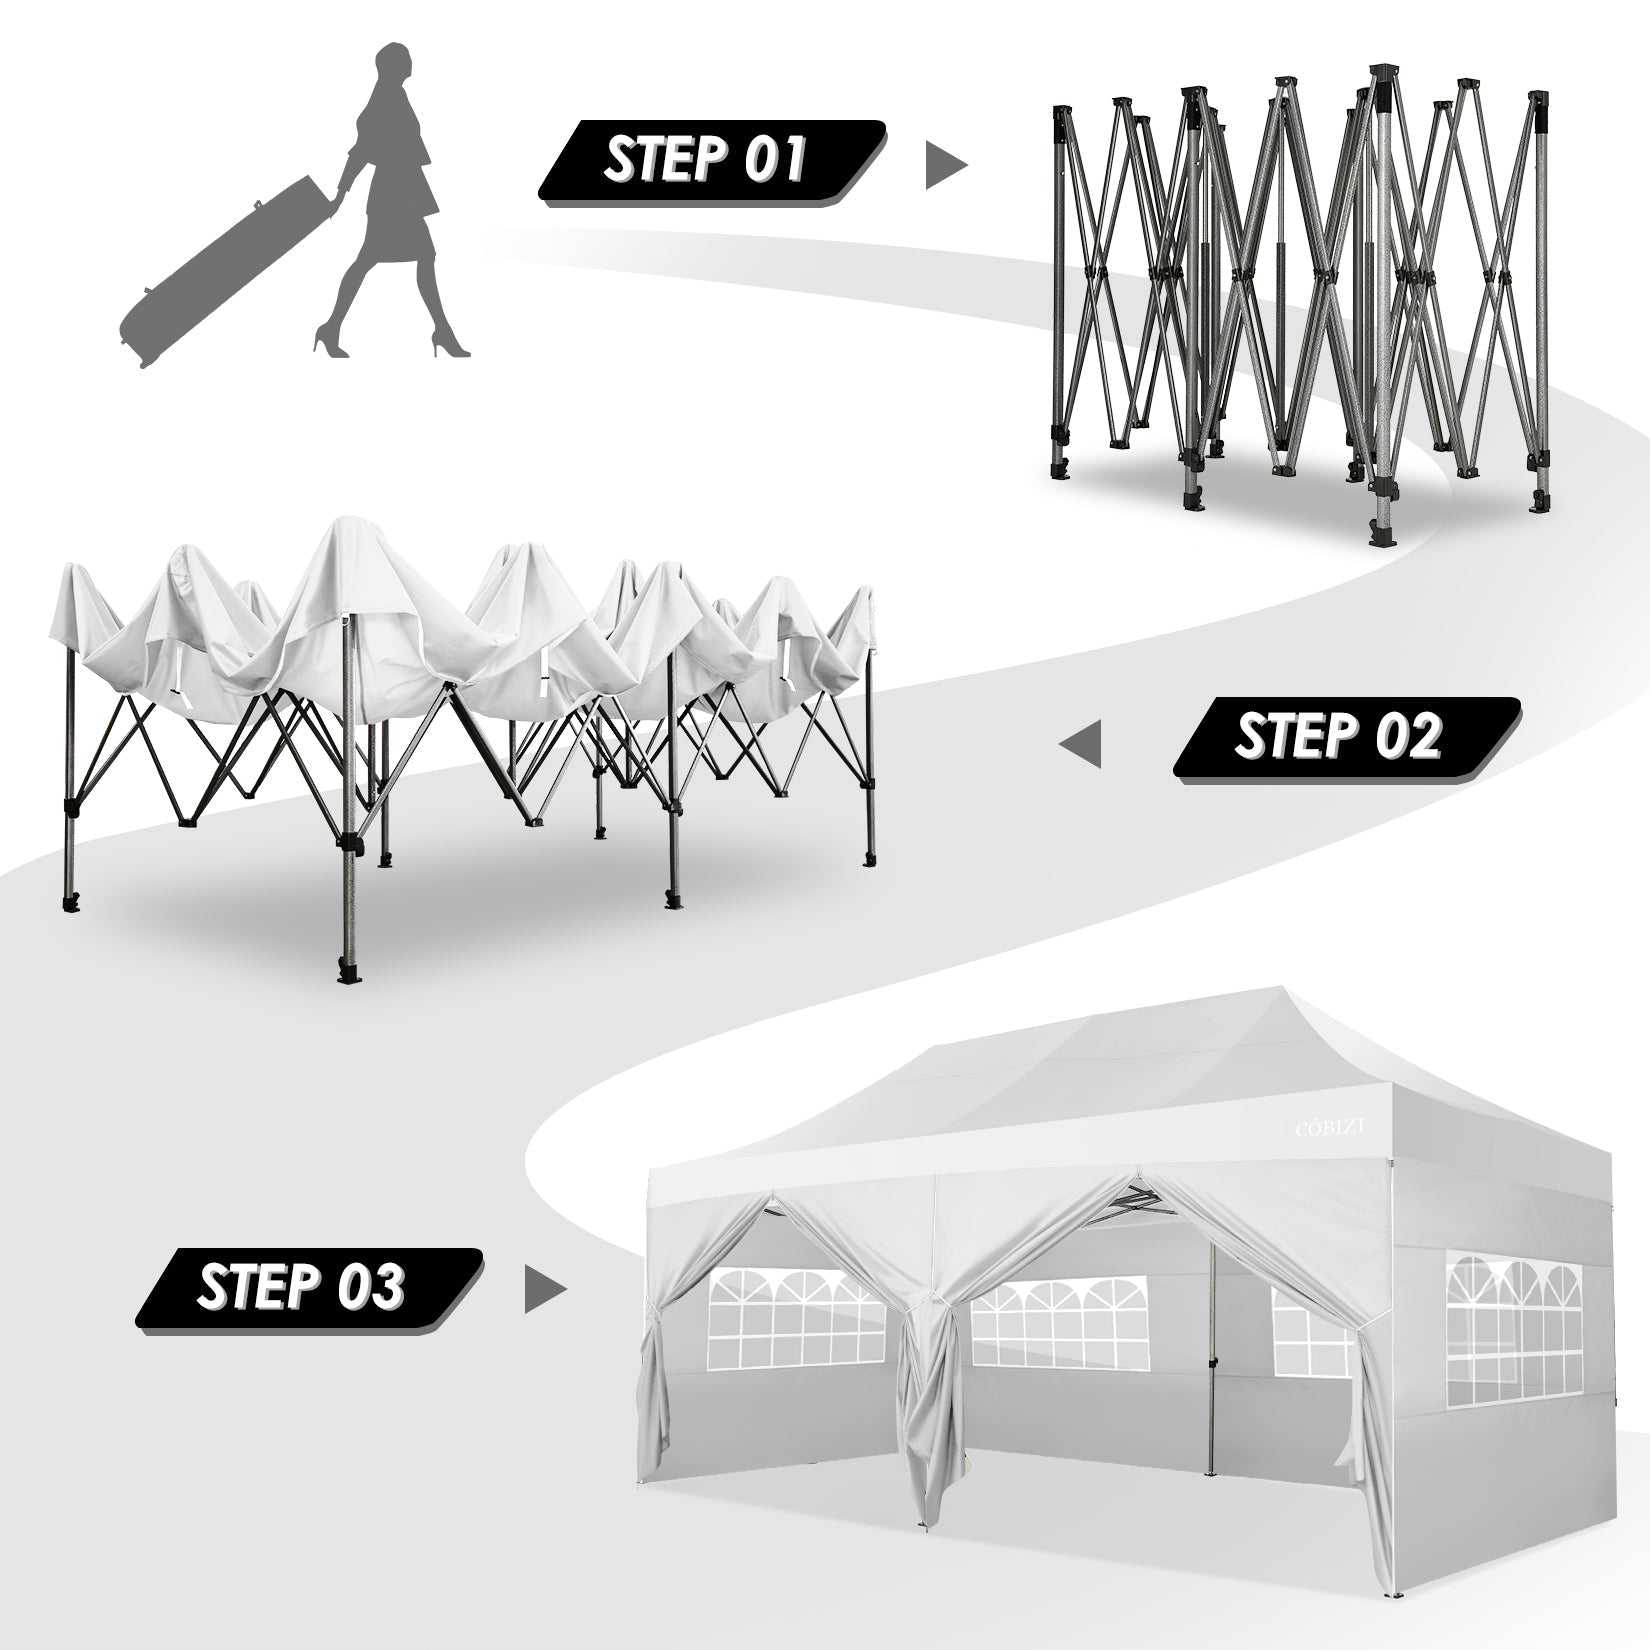 10'x20' Pop Up Canopy Waterproof Folding Tent Outdoor Easy Set-up Instant Tent Heavy Duty Commercial Wedding Party Shelter with 6 Removable Sidewalls, 6 Sandbags, Roller Bag, White